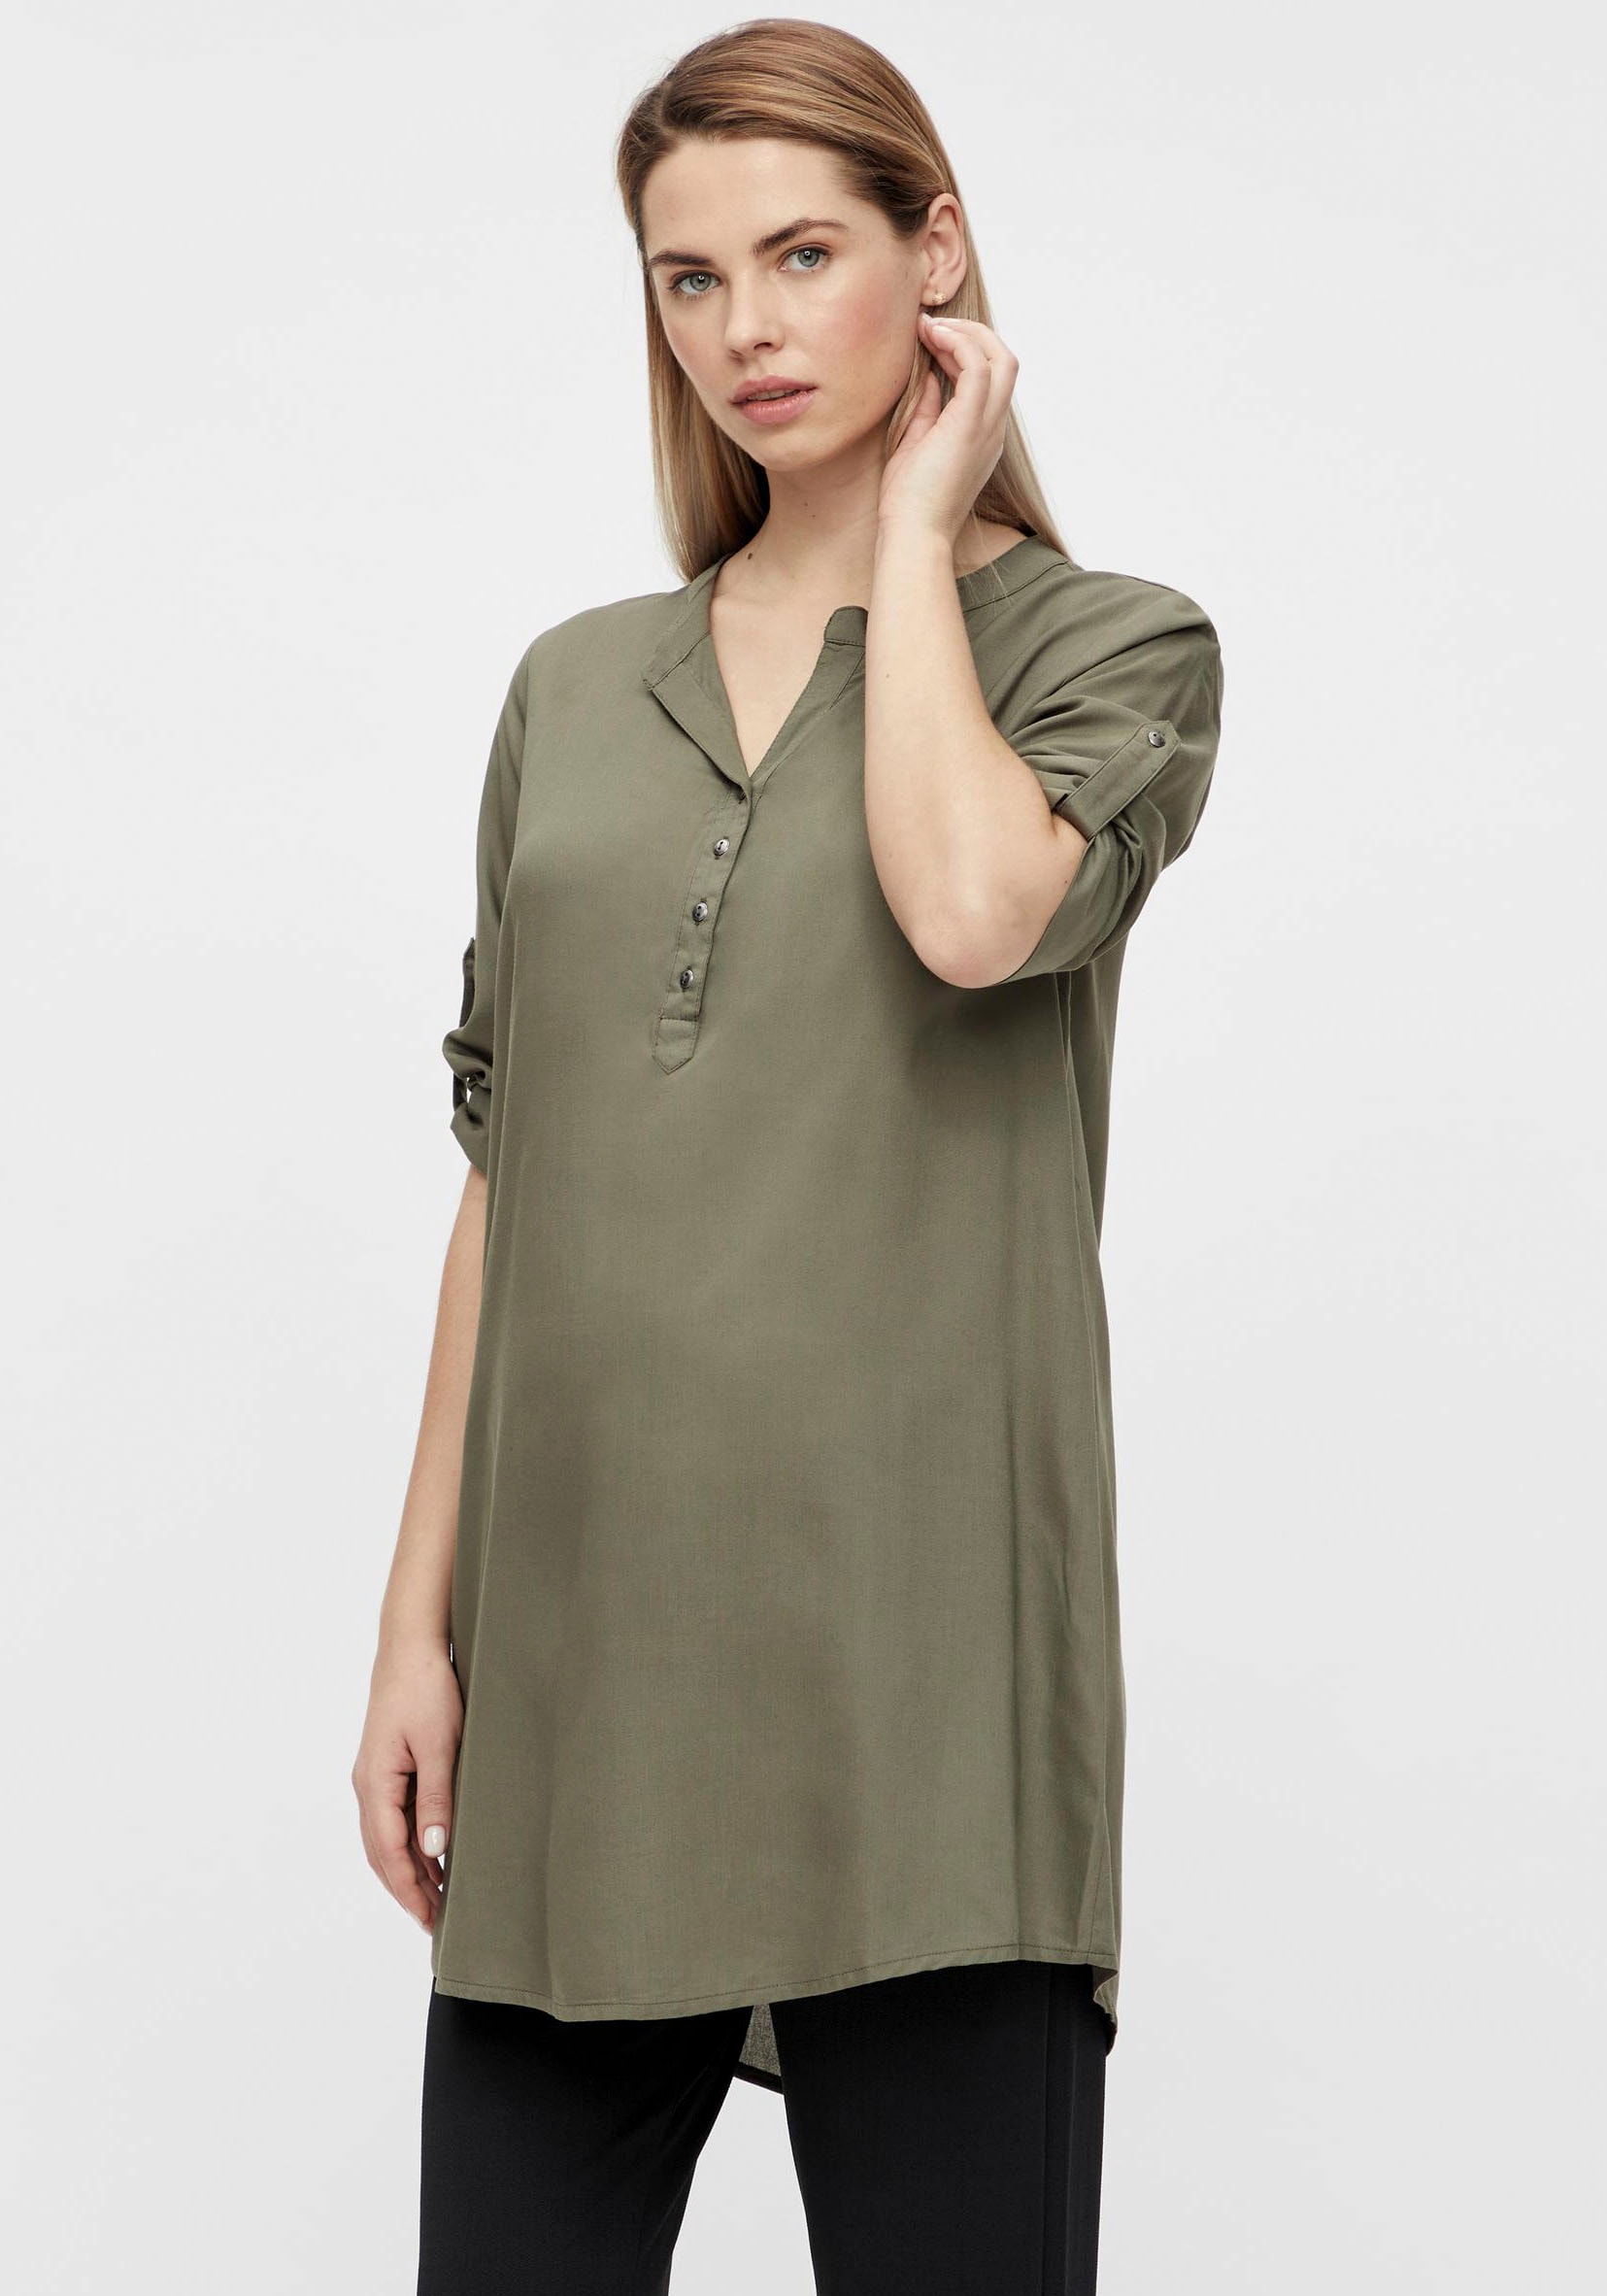 Mamalicious NOS Damen MLMERCY 3/4 Woven NOOS ECO A. Tunic, Dusty Olive, S